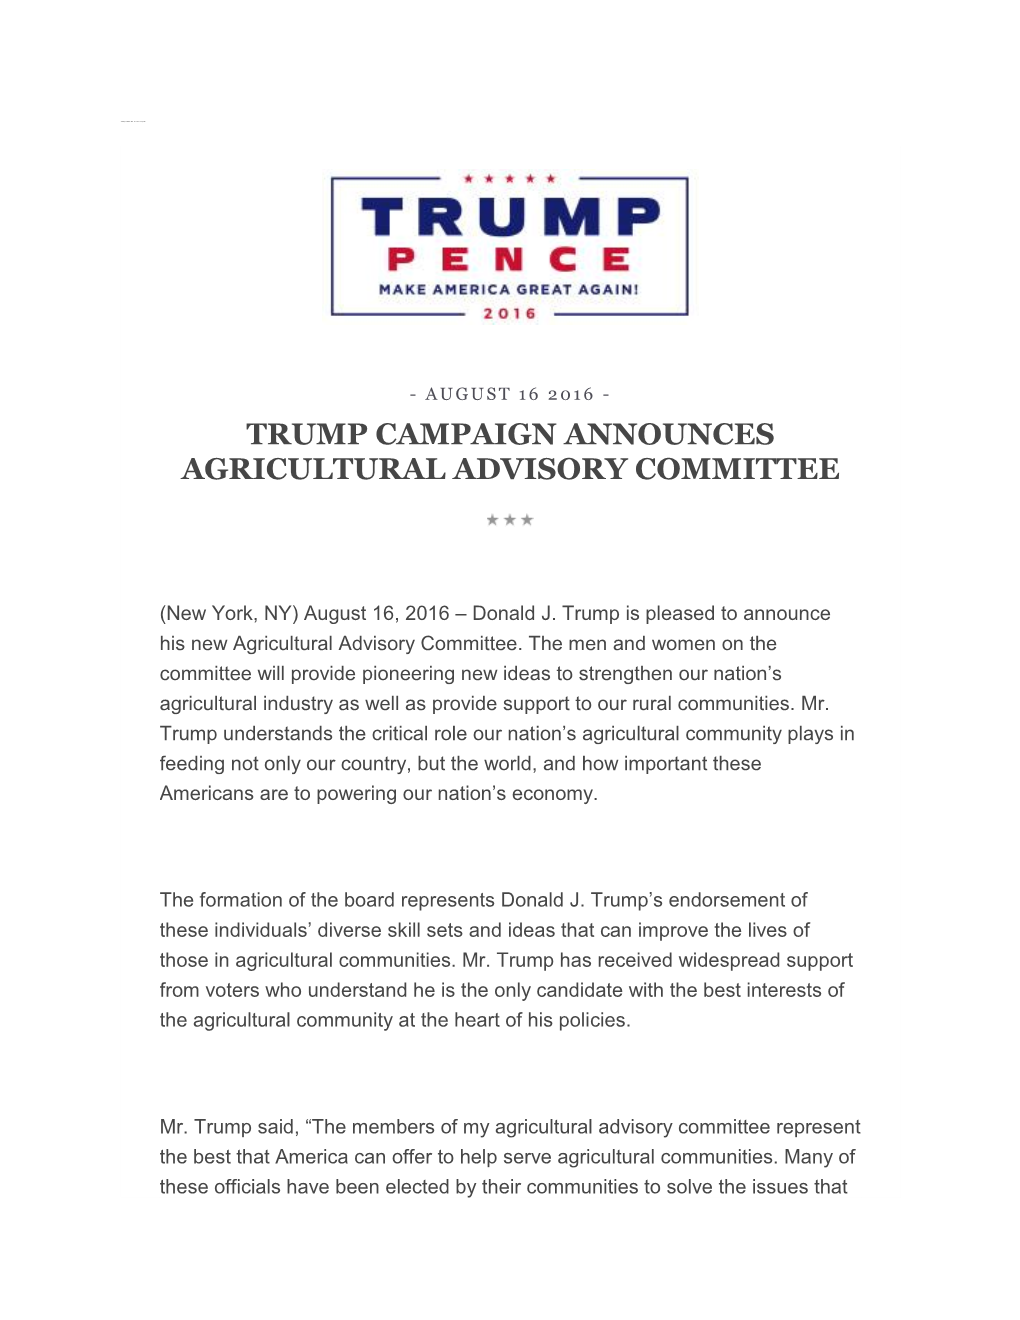 Trump Campaign Announces Agricultural Advisory Committee